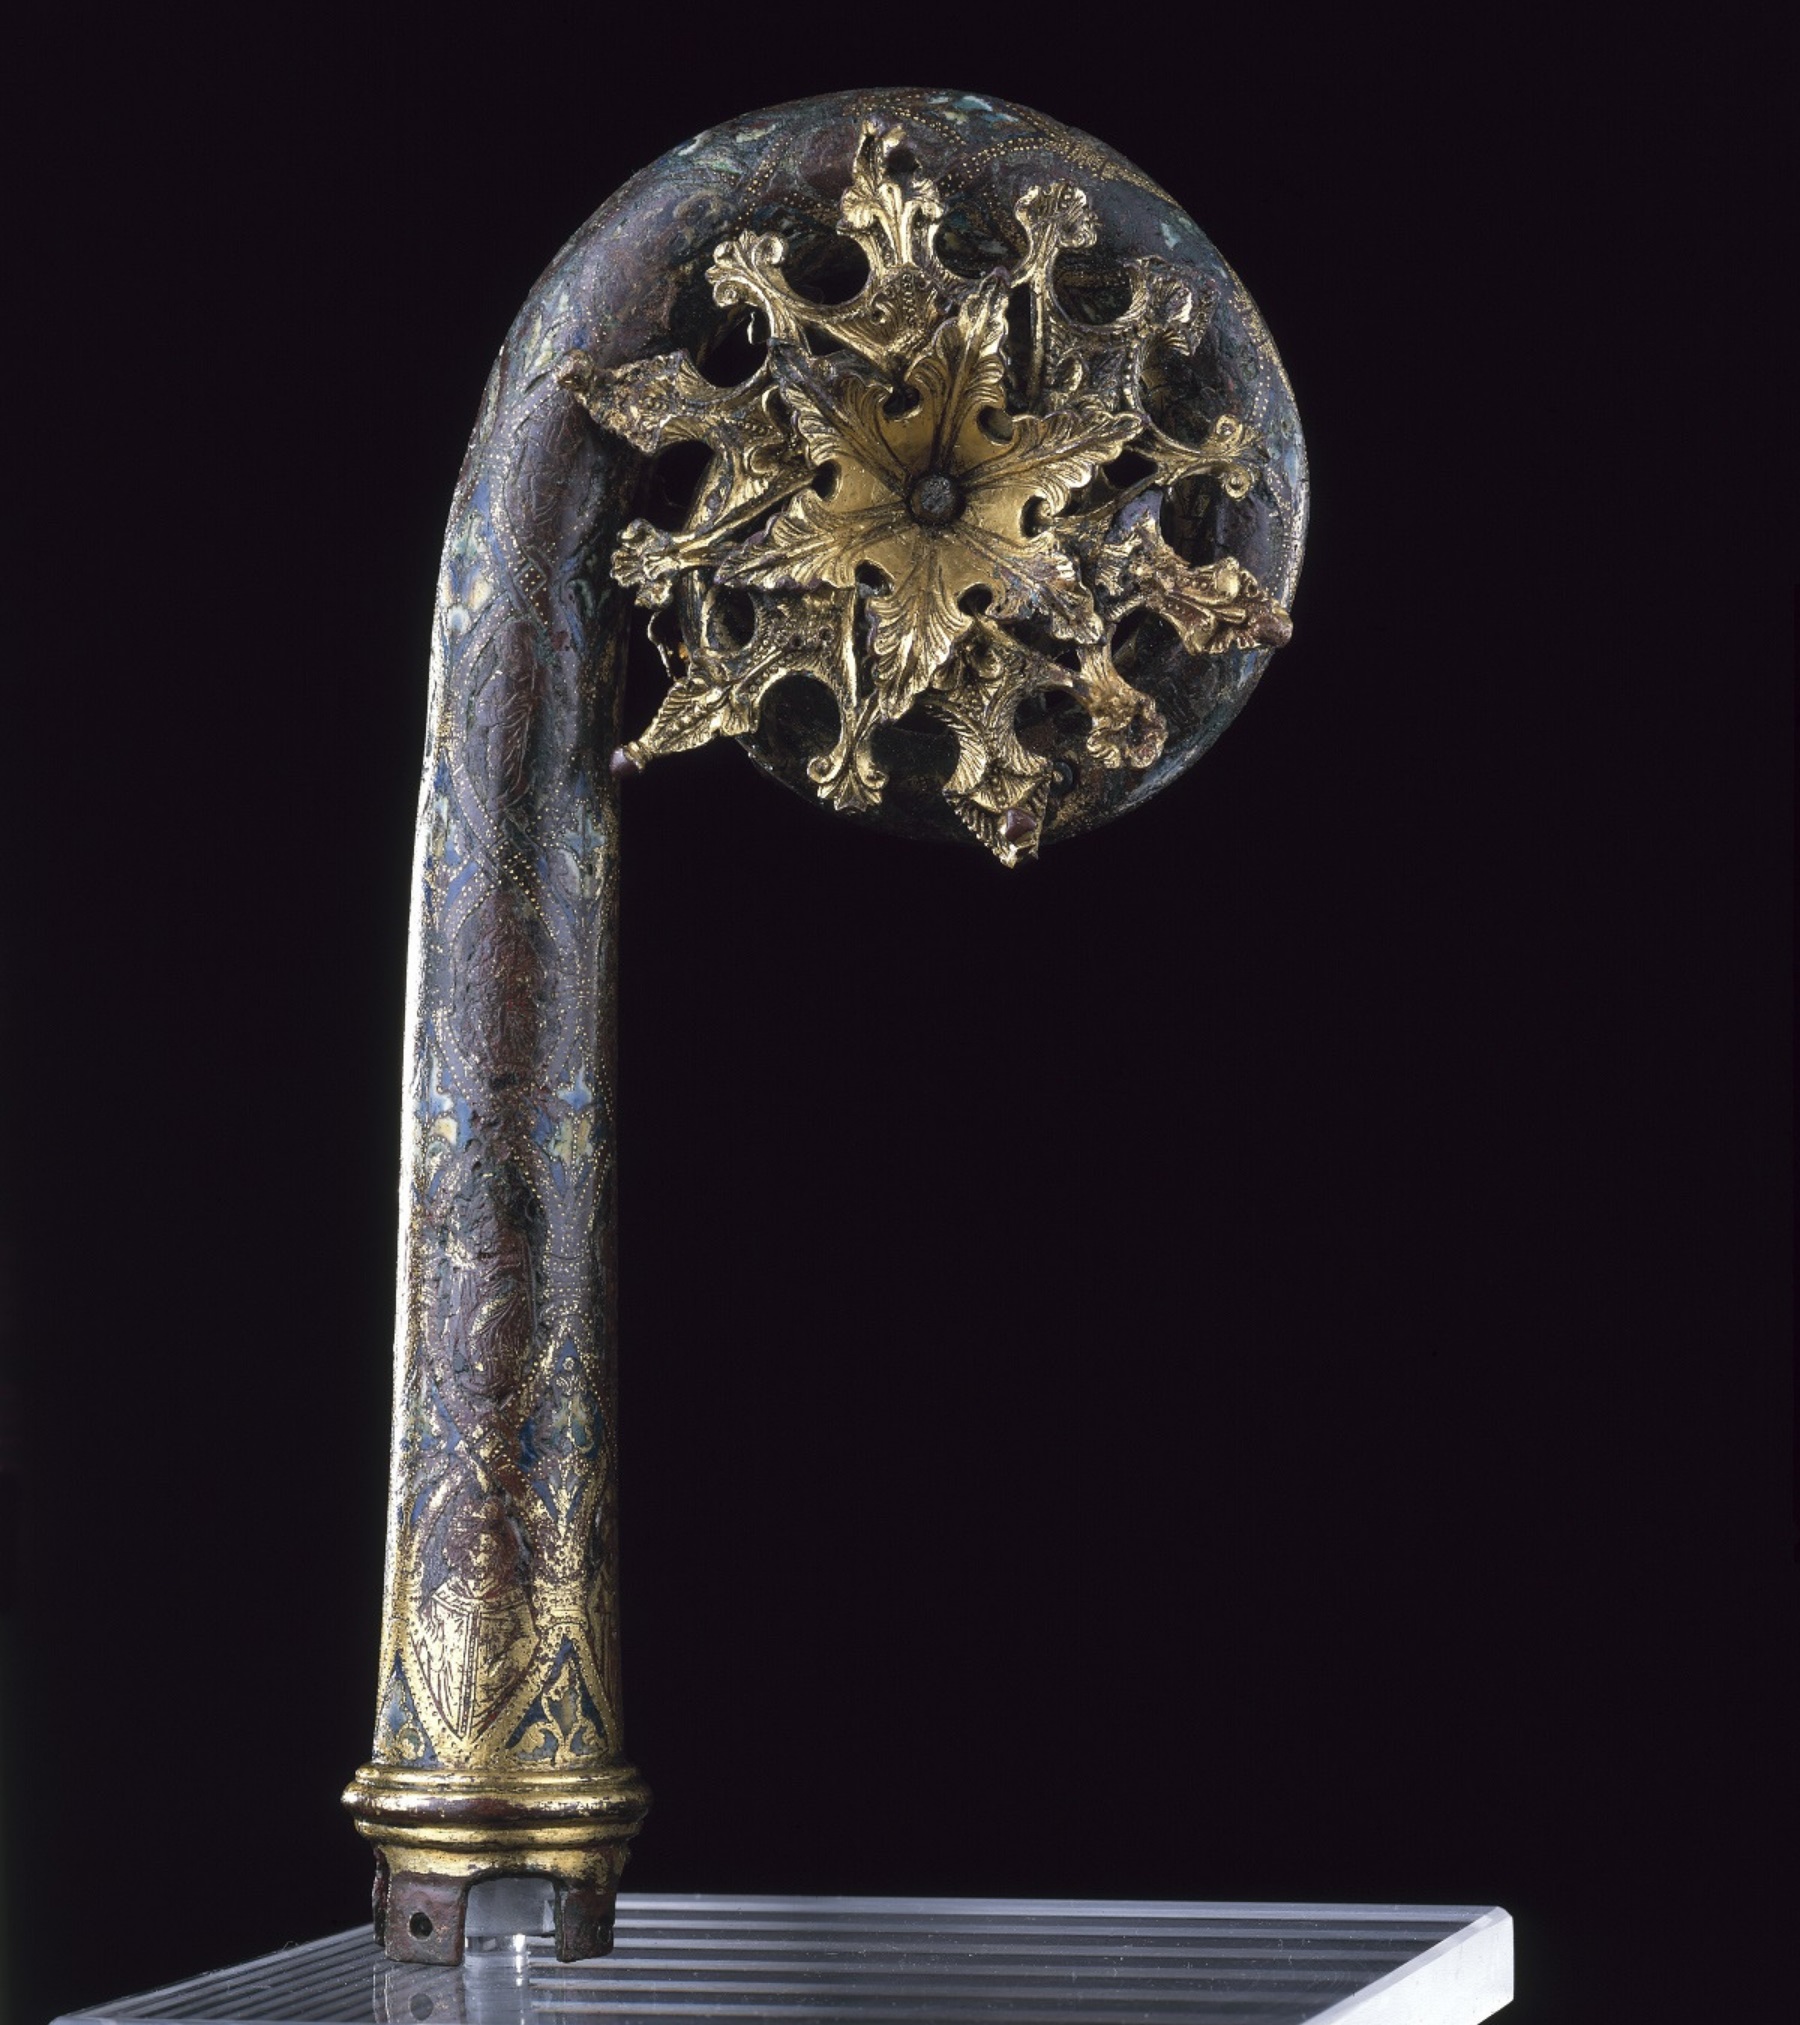 Metalwork object like a cross between a staff and a fiddlehead fern. The staff is grey-blue, and a golden sun-like burst is within its coiled top.